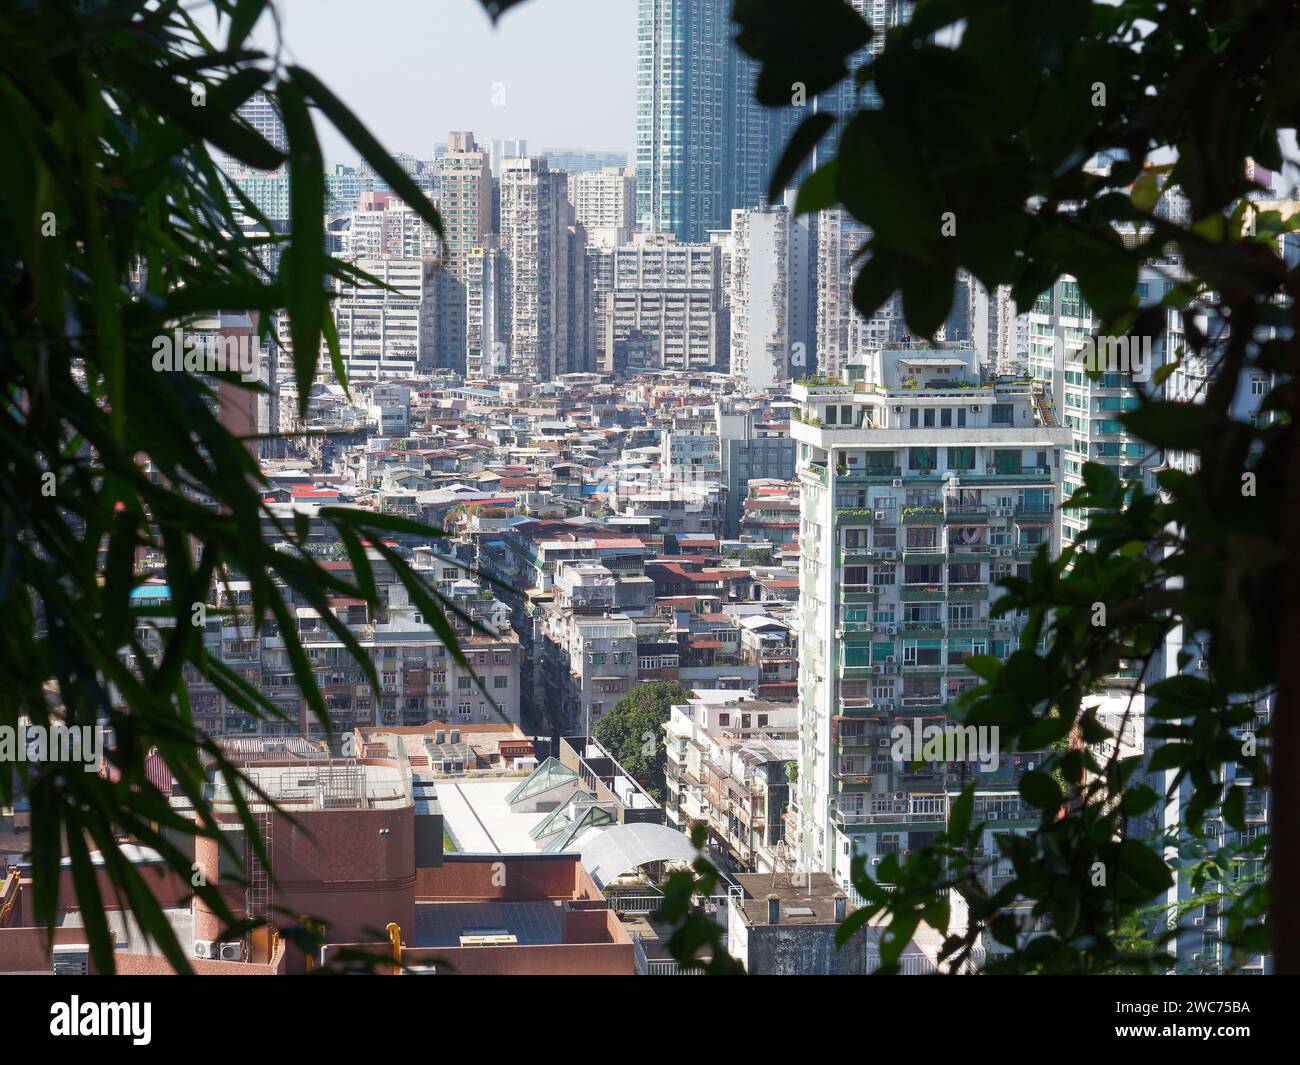 View looking down on congested apartment blocks and urban landscape of Macau Stock Photo